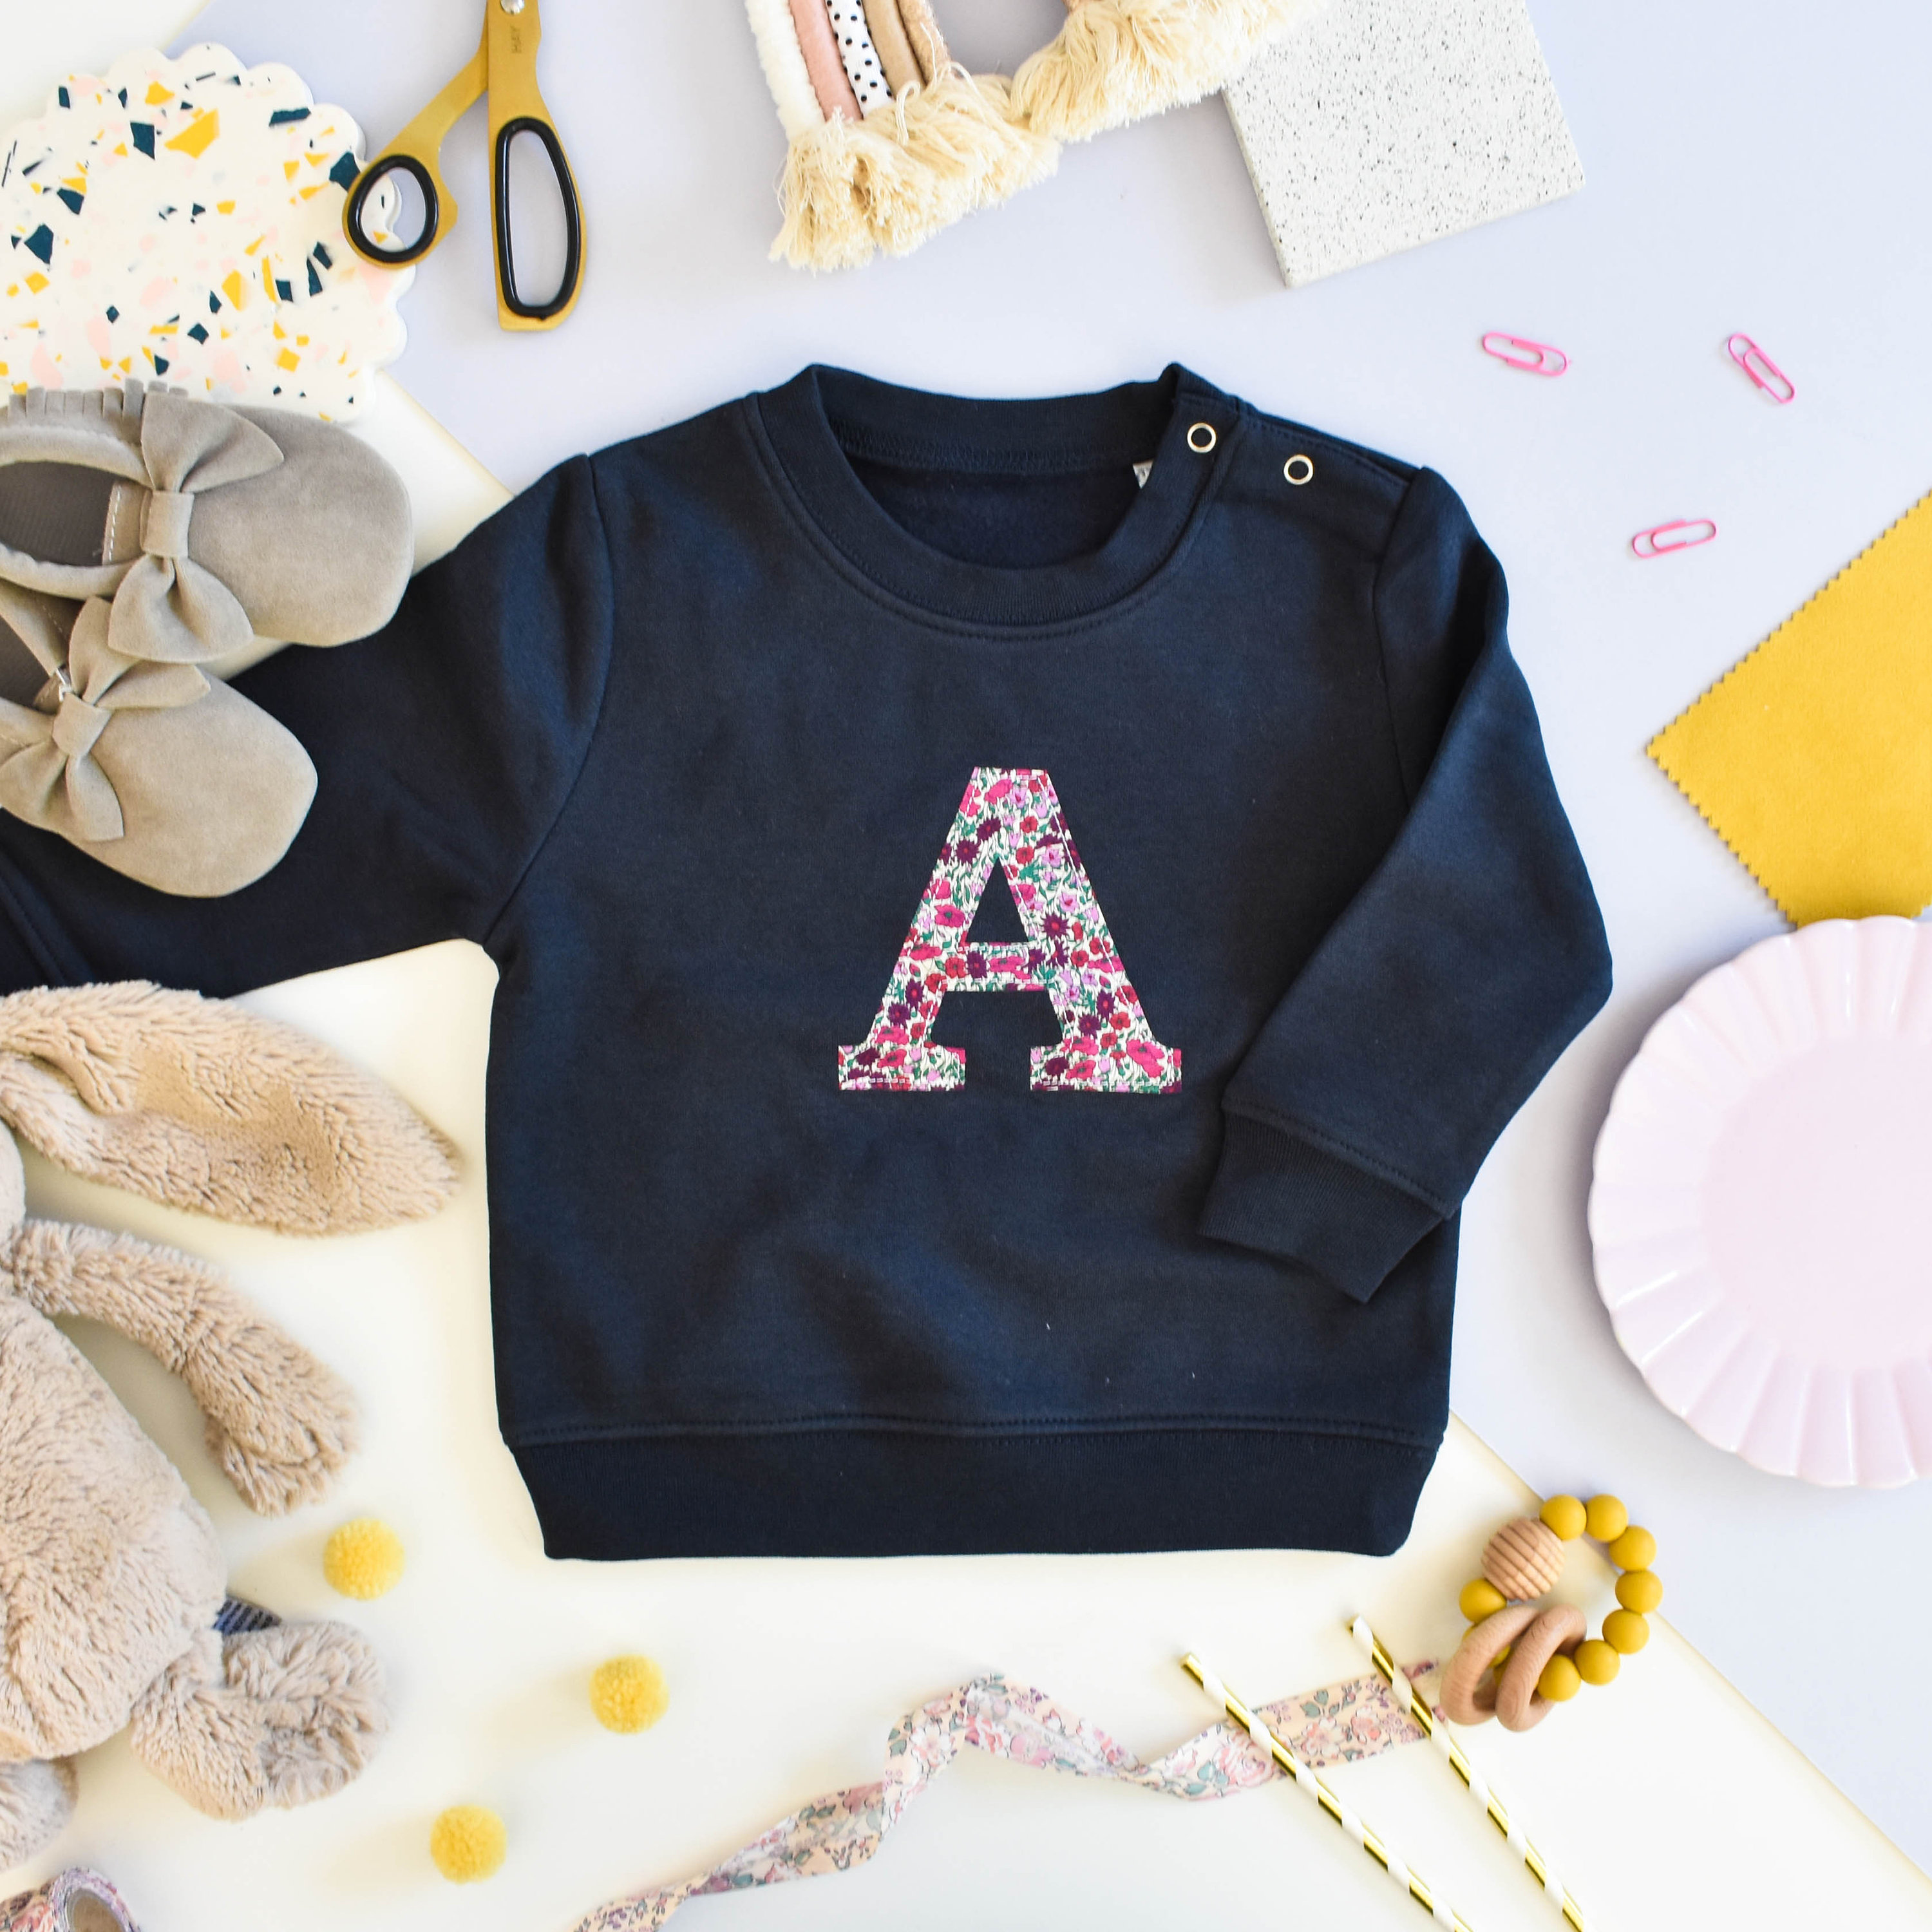 Personalised Birthday Jumper Children's Liberty of London First/Second Birthday Sweatshirt Clothing Unisex Kids Clothing Jumpers 